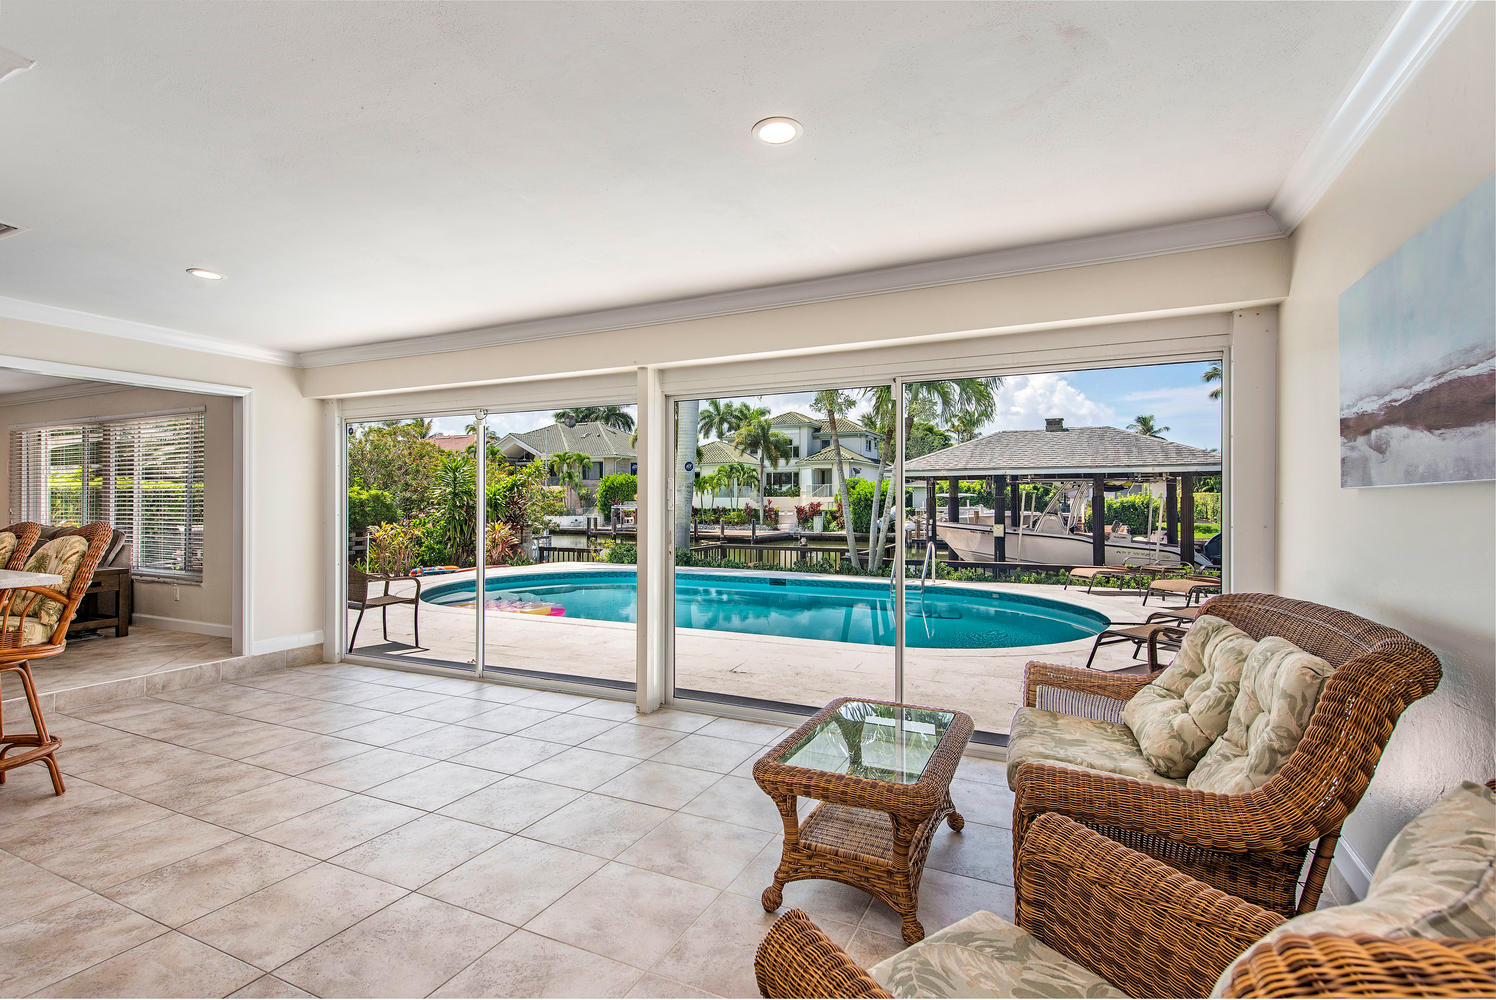 Sitting area with view of pool and canal at Naples vacation rental house